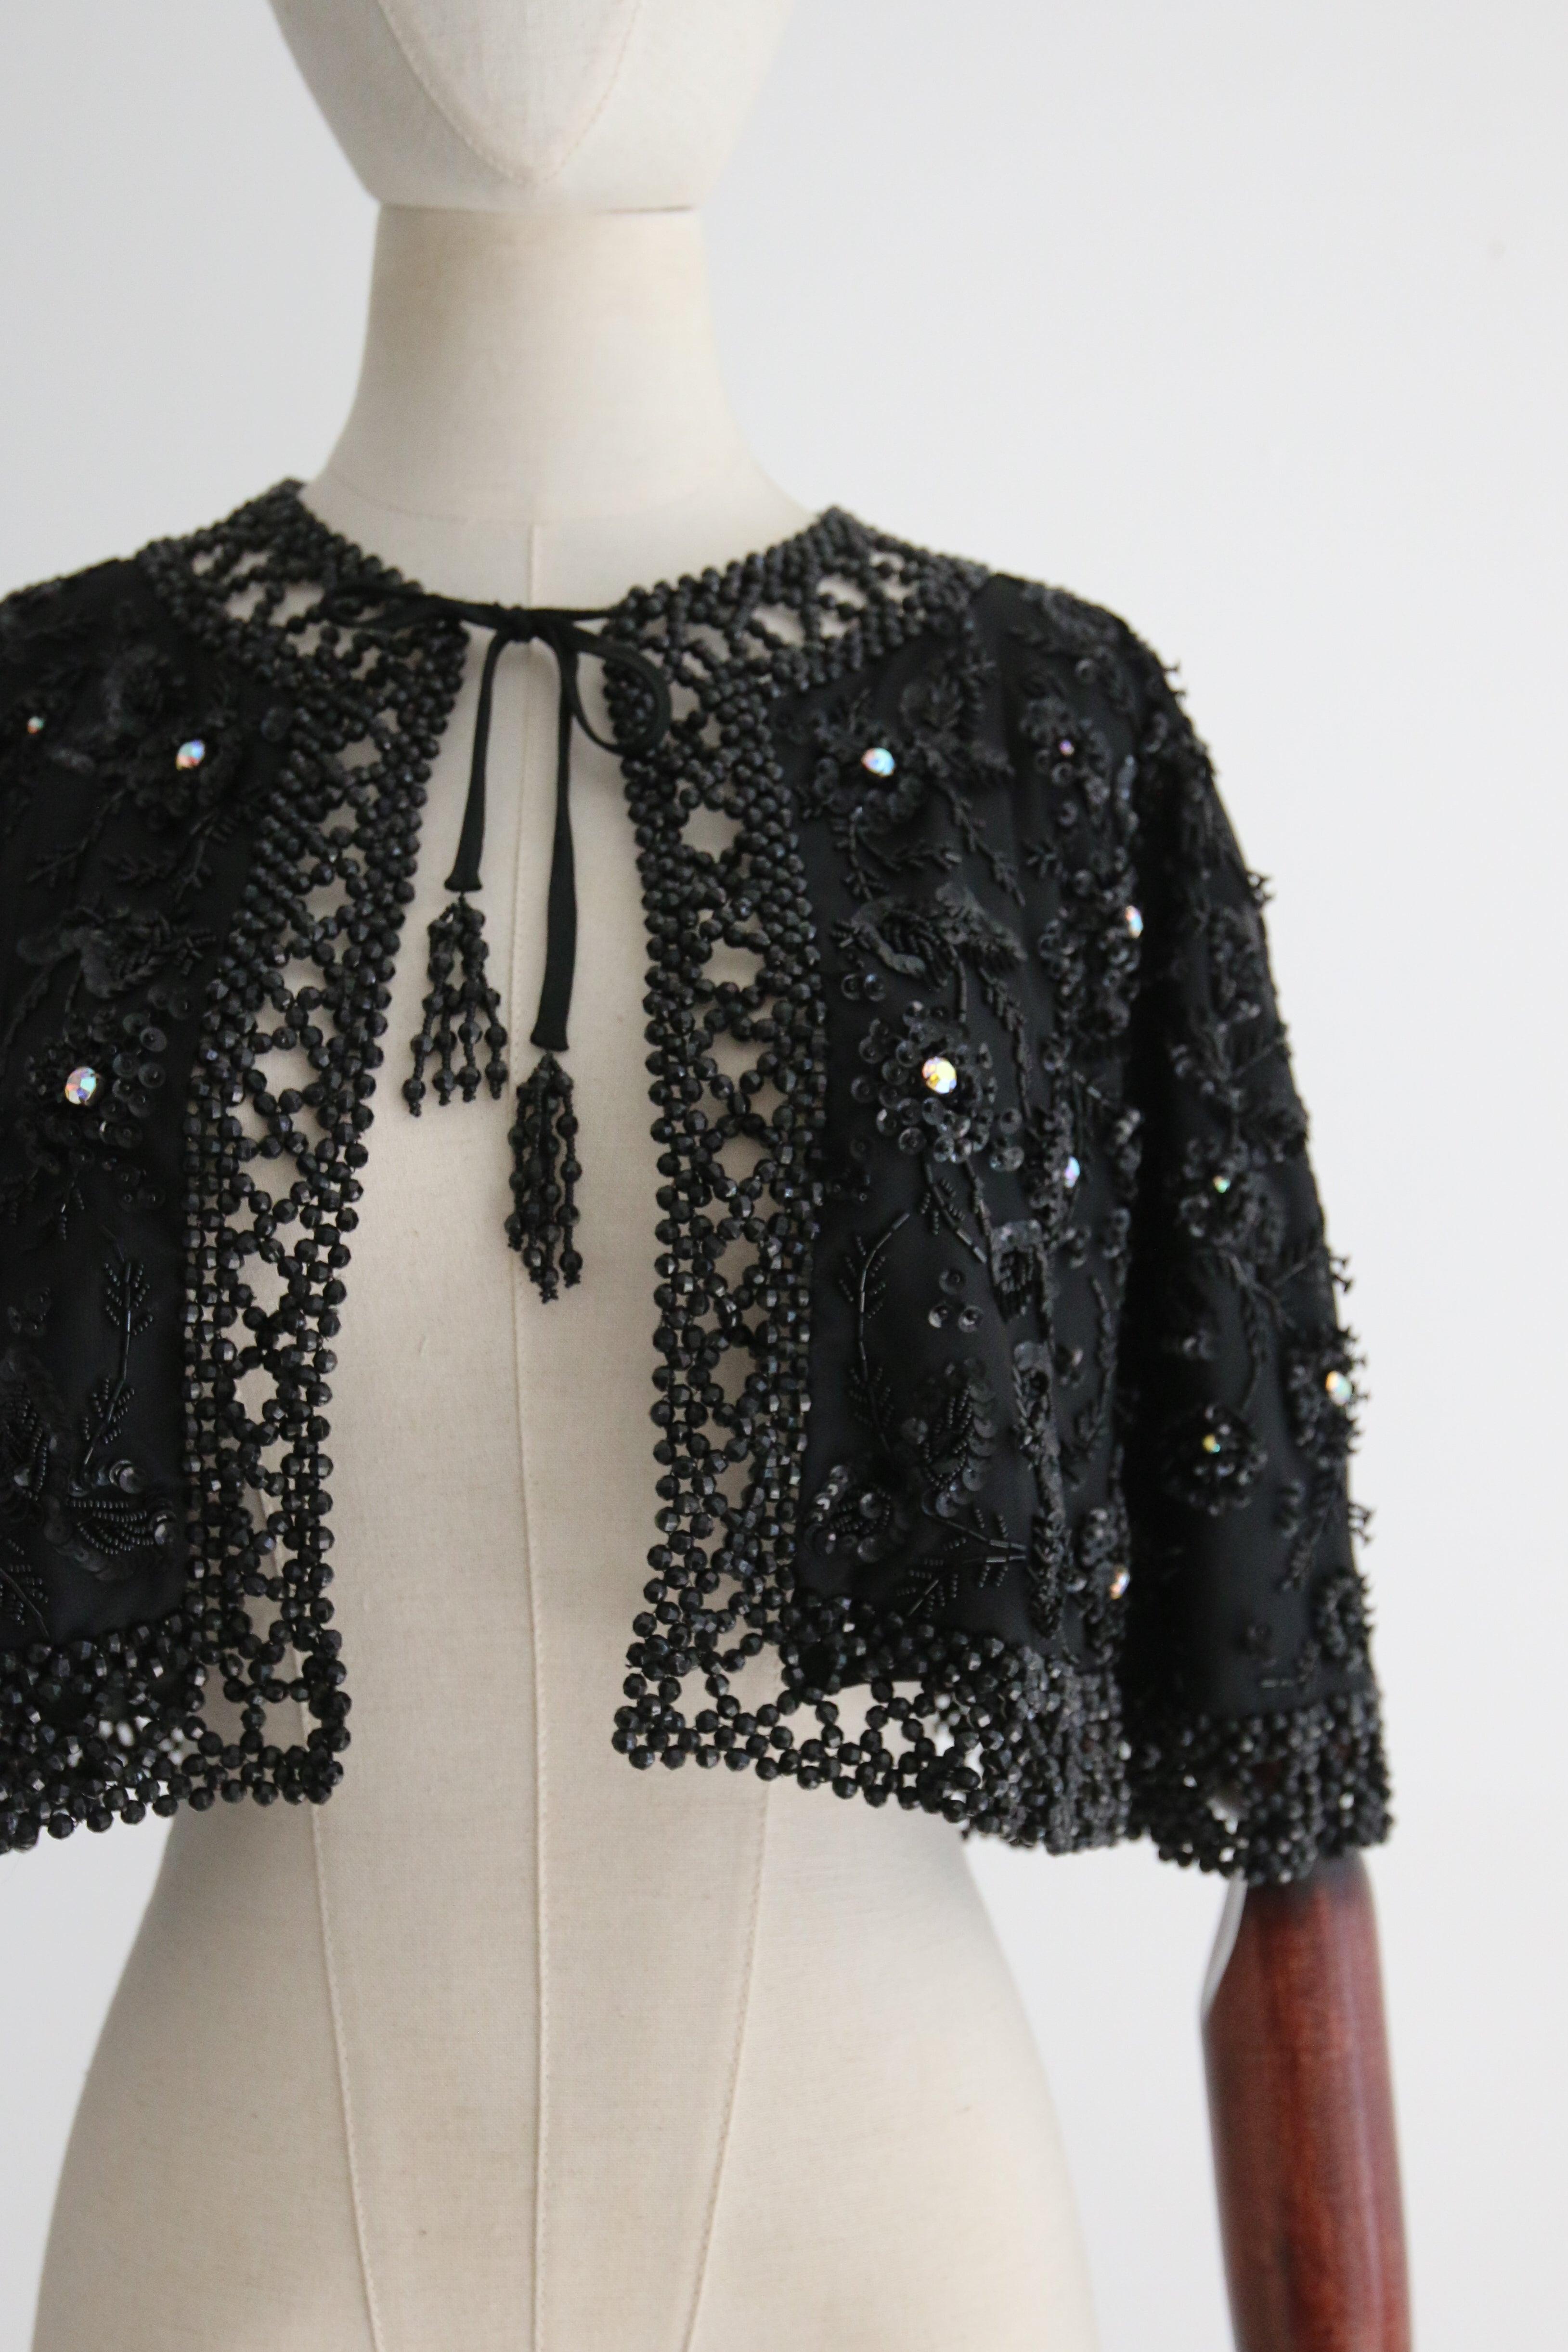 Vintage 1960's Black Beaded and Rhinestone Floral Evening Cape In Good Condition For Sale In Cheltenham, GB